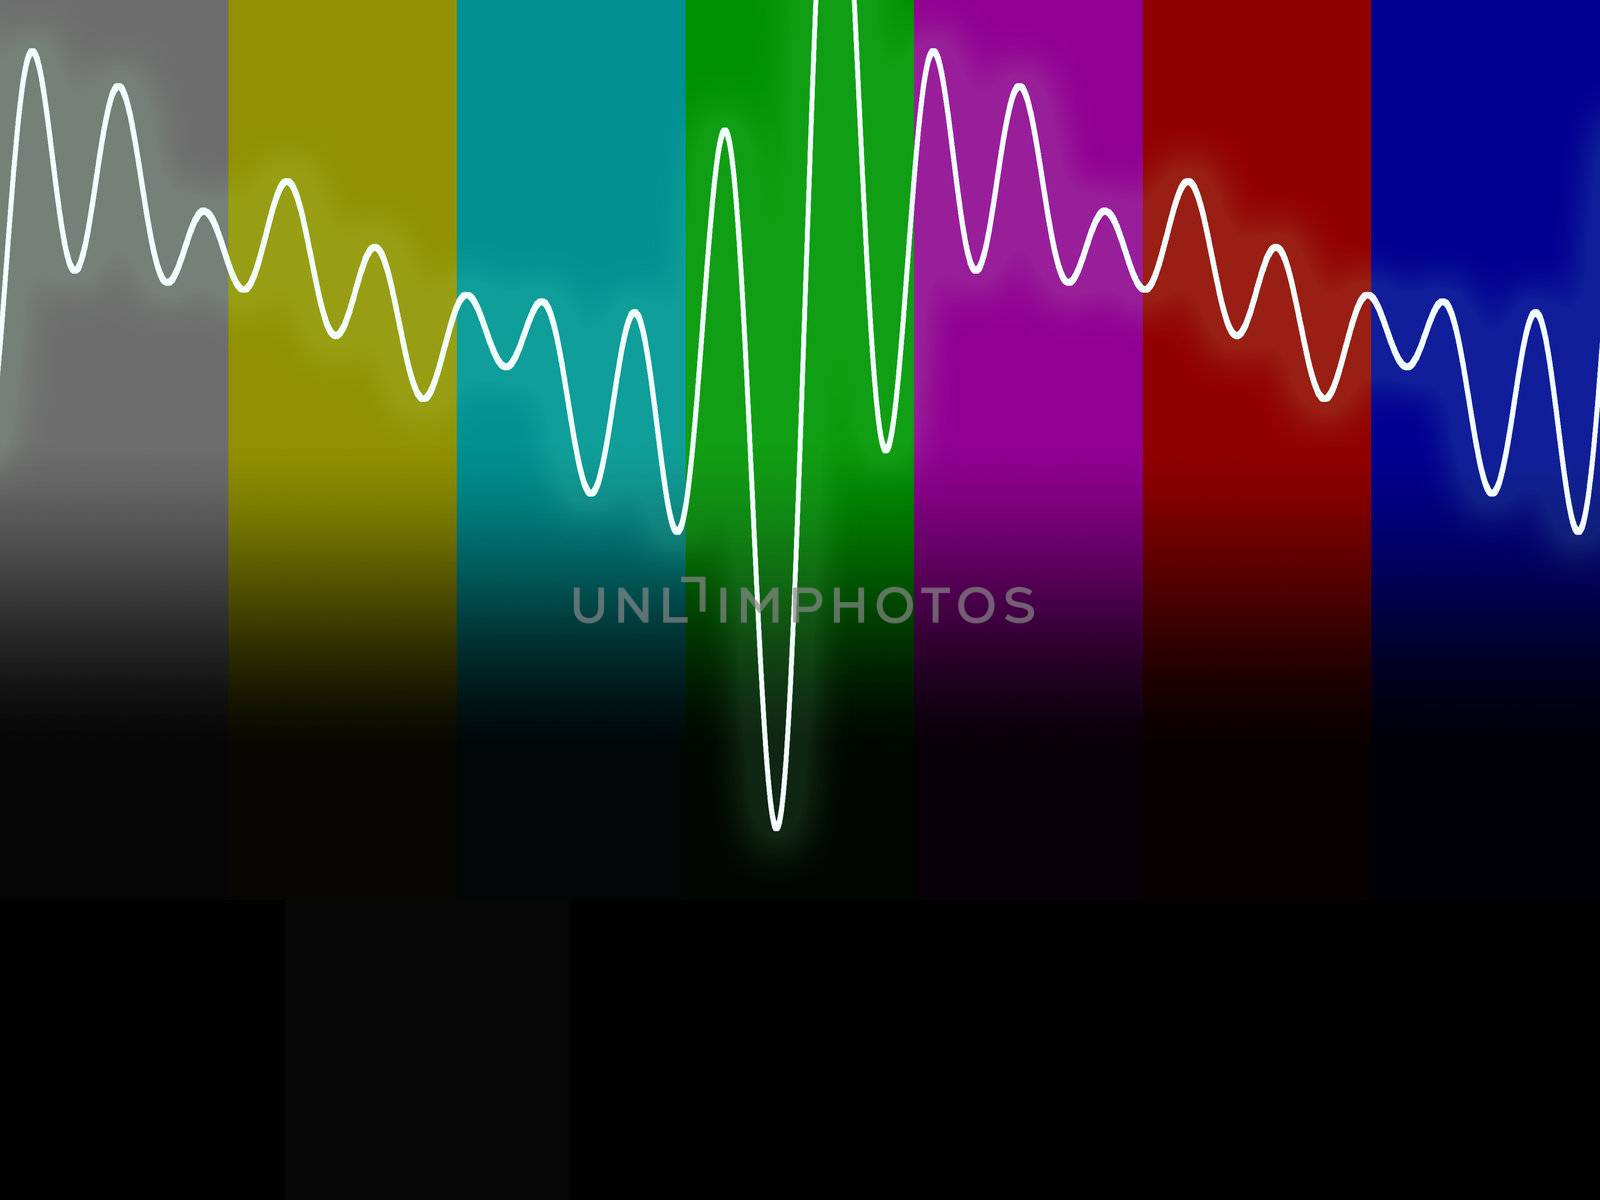 test card and waveform by tommroch